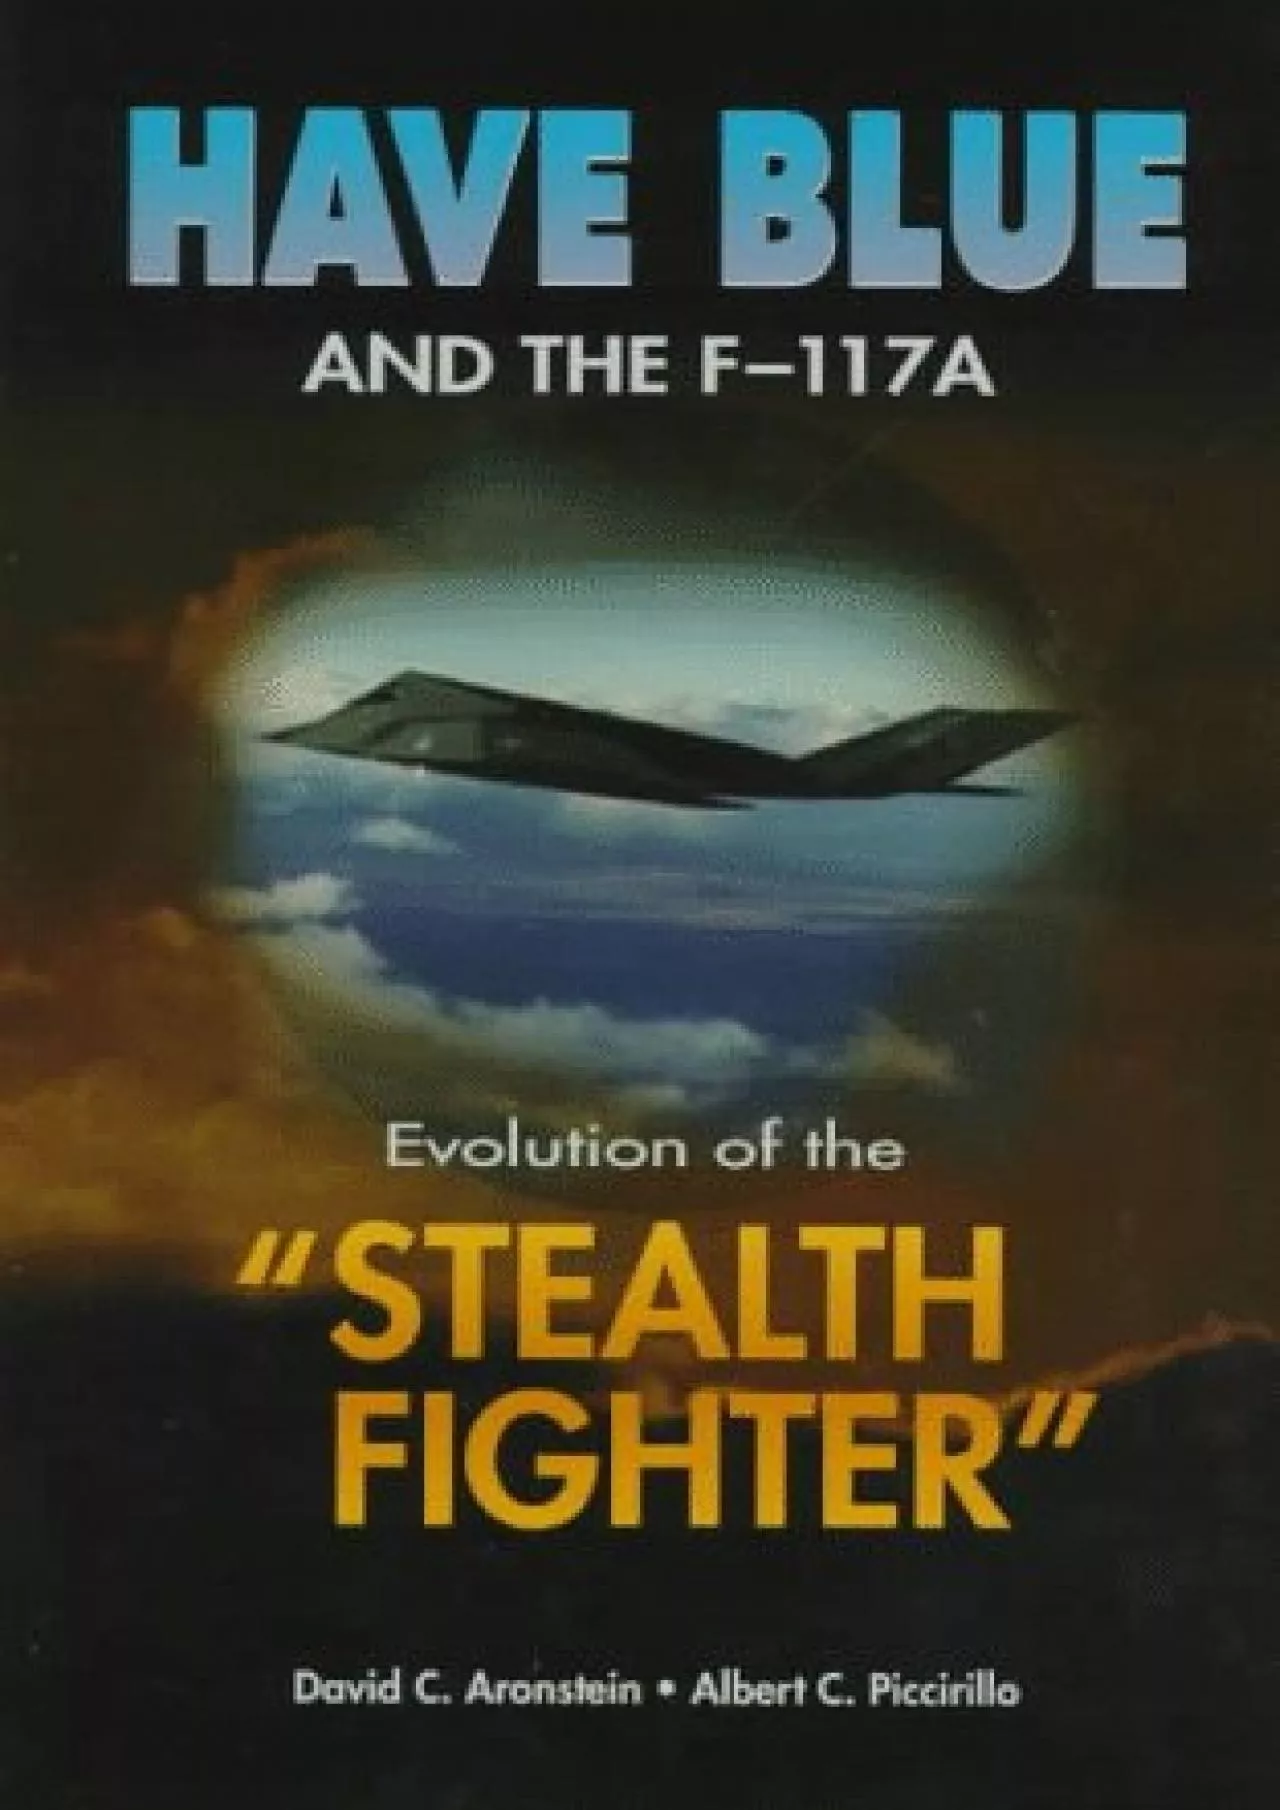 (BOOS)-Have Blue and the F-117A: Evolution of the Stealth Fighter (Library of Flight)